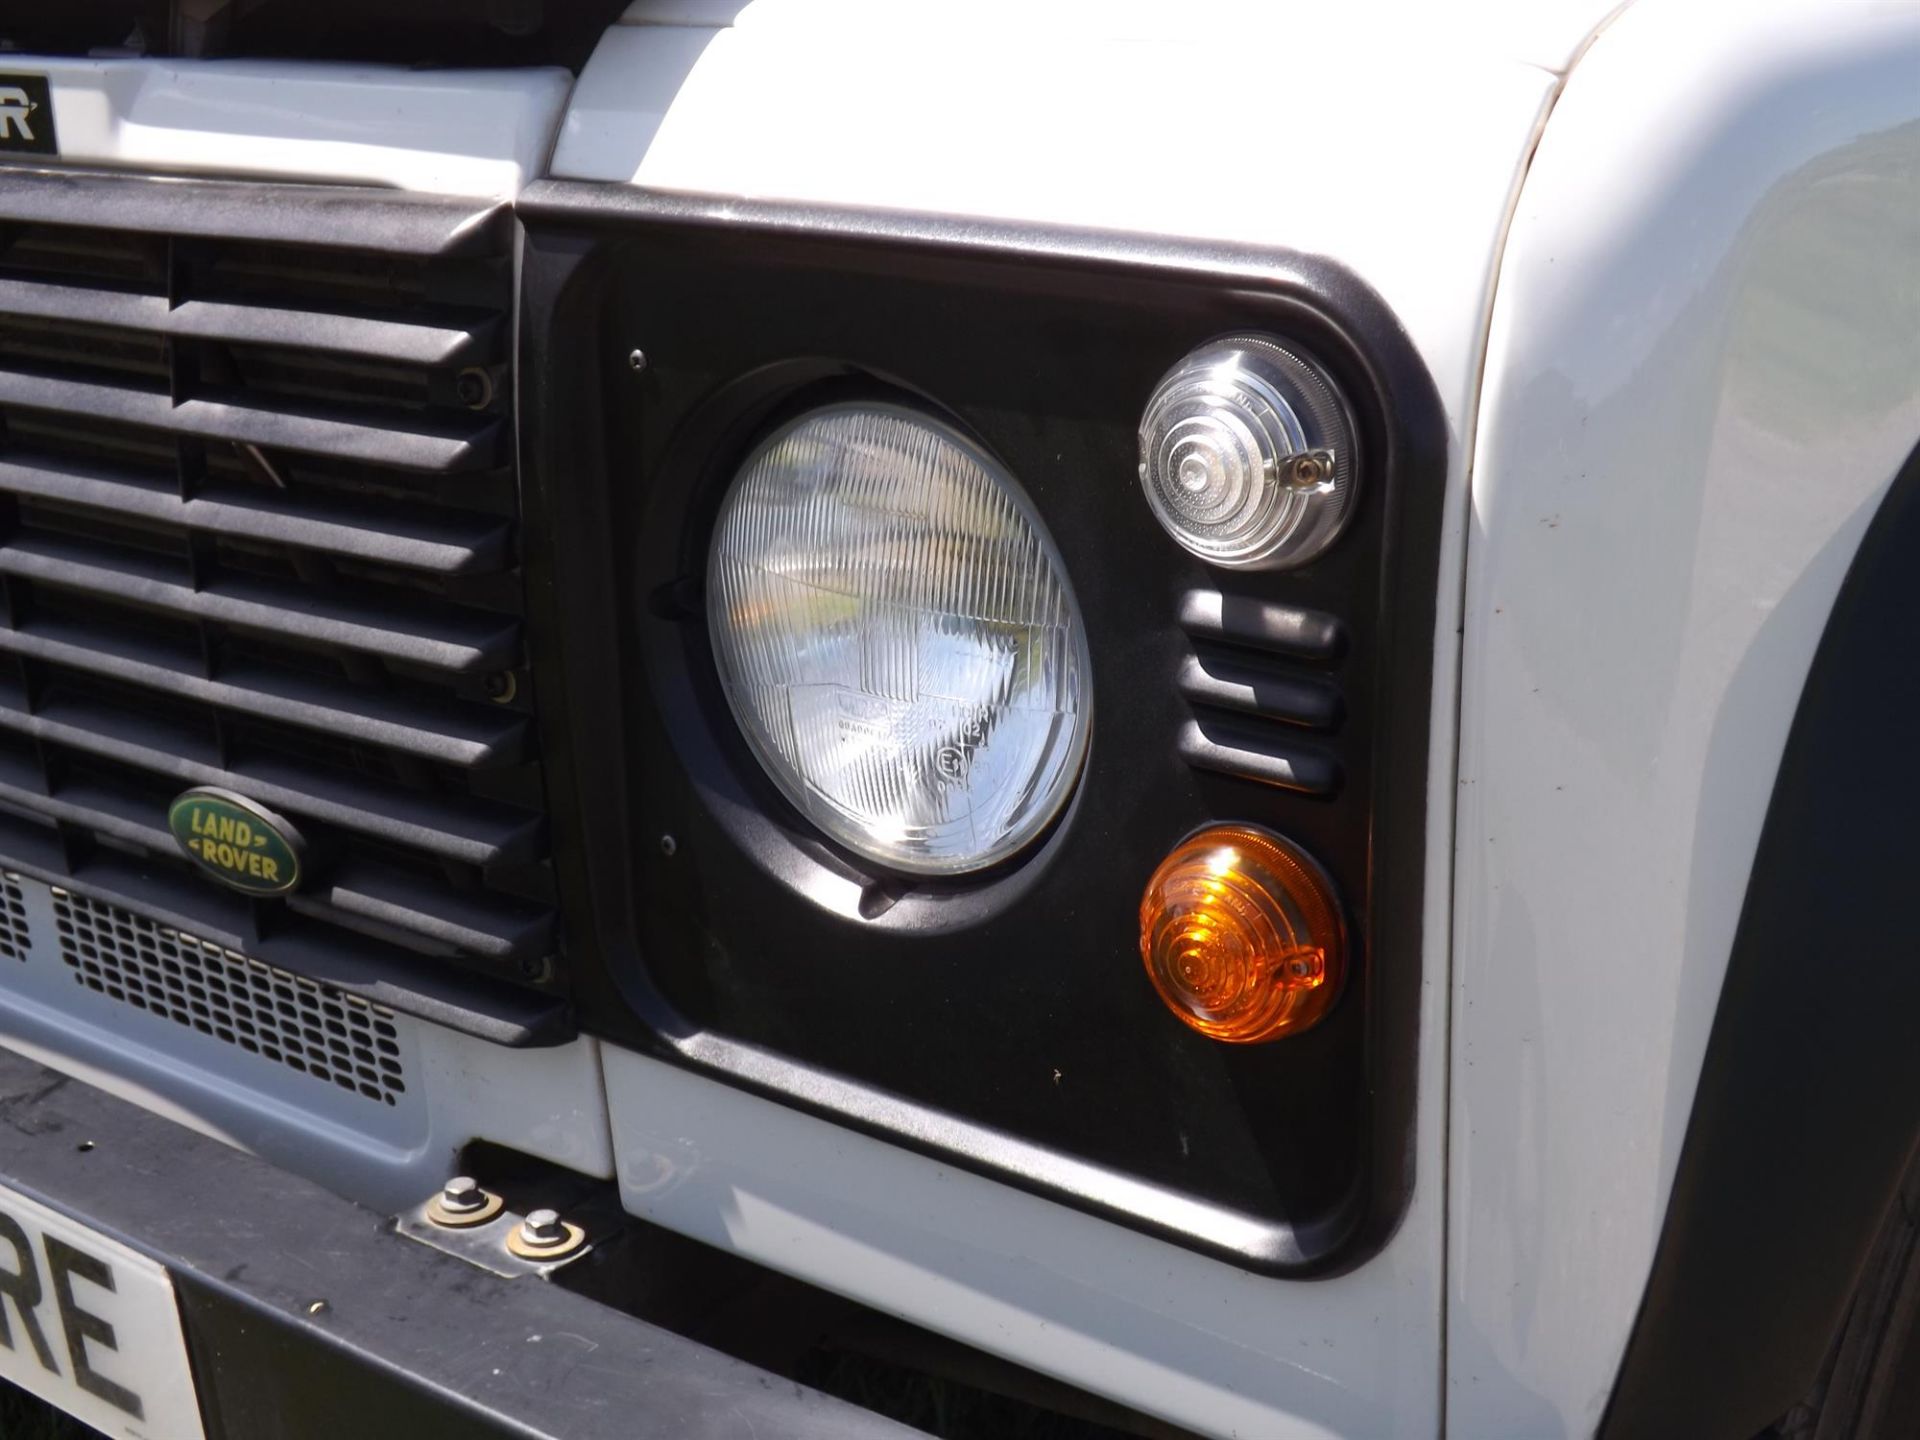 2006 Land Rover 110 Td5 Station Wagon - Image 3 of 10